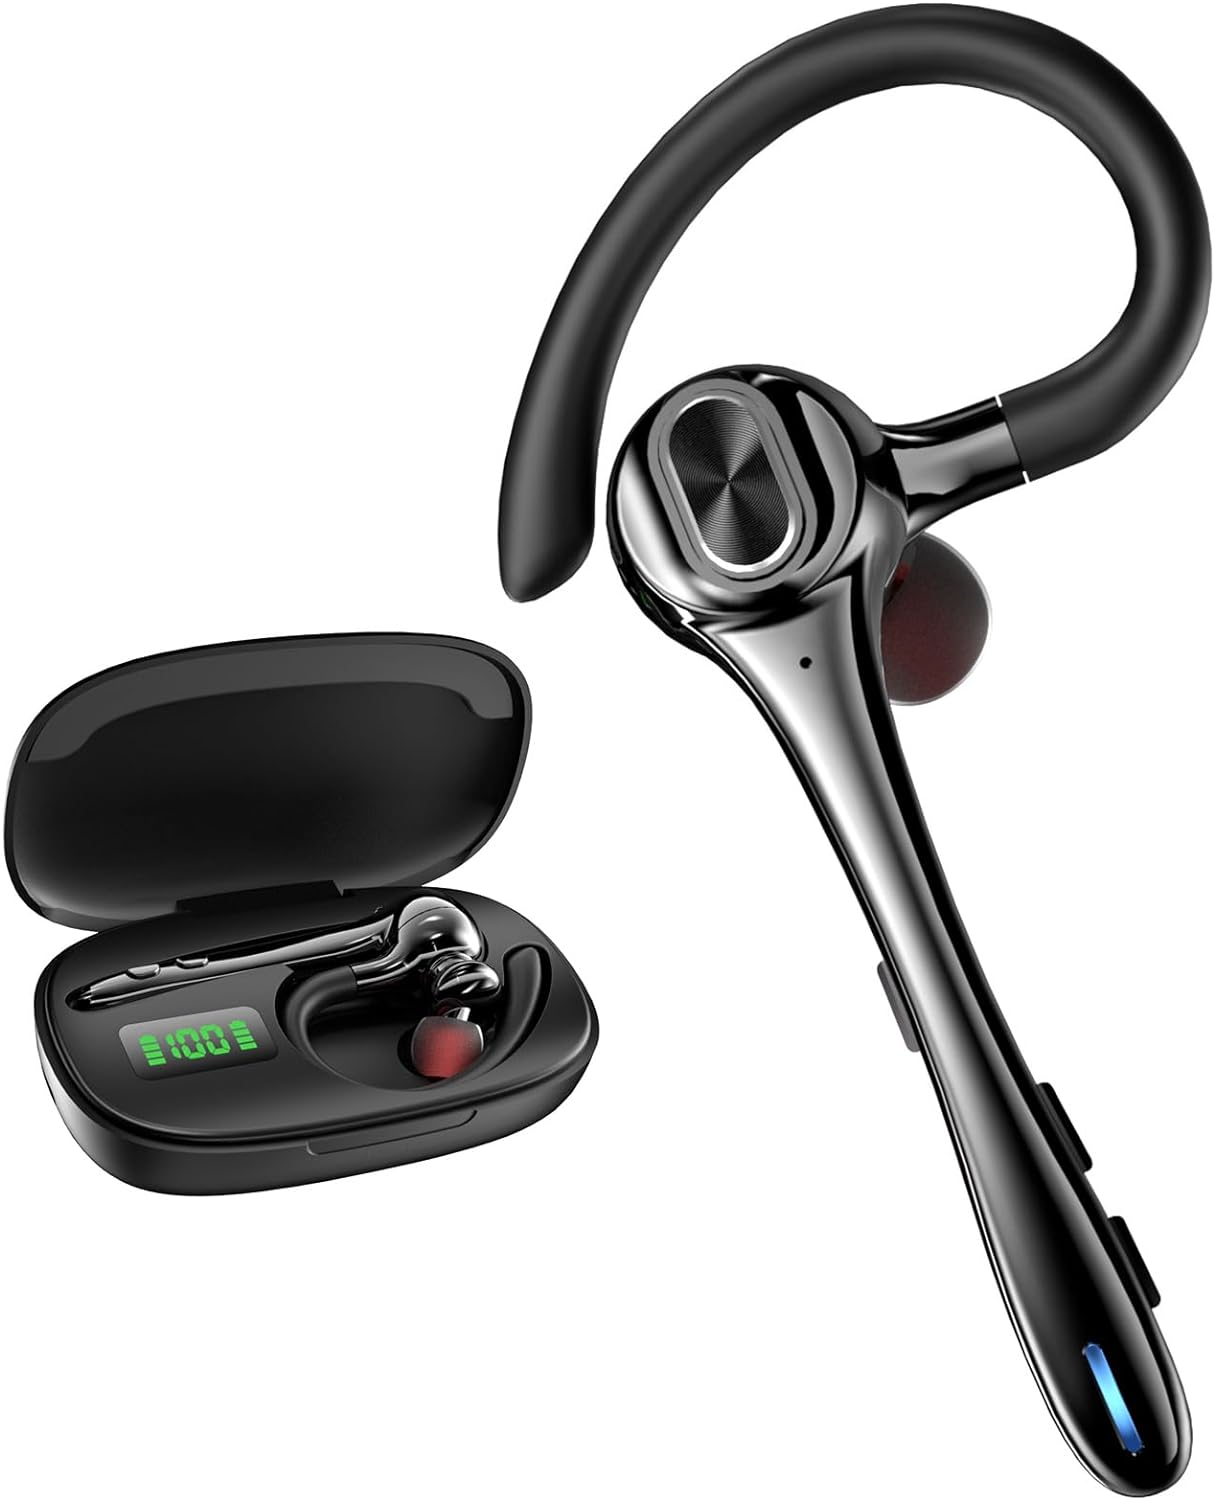 Earbuds Wireless Earpiece Bluetooth Headset with Noise Canceling Mic 160H Standby Time Hands Free Earphones Single Ear Headphone for iphone Android Samsung Cell Phones PC TV Computer Game Trucker Work